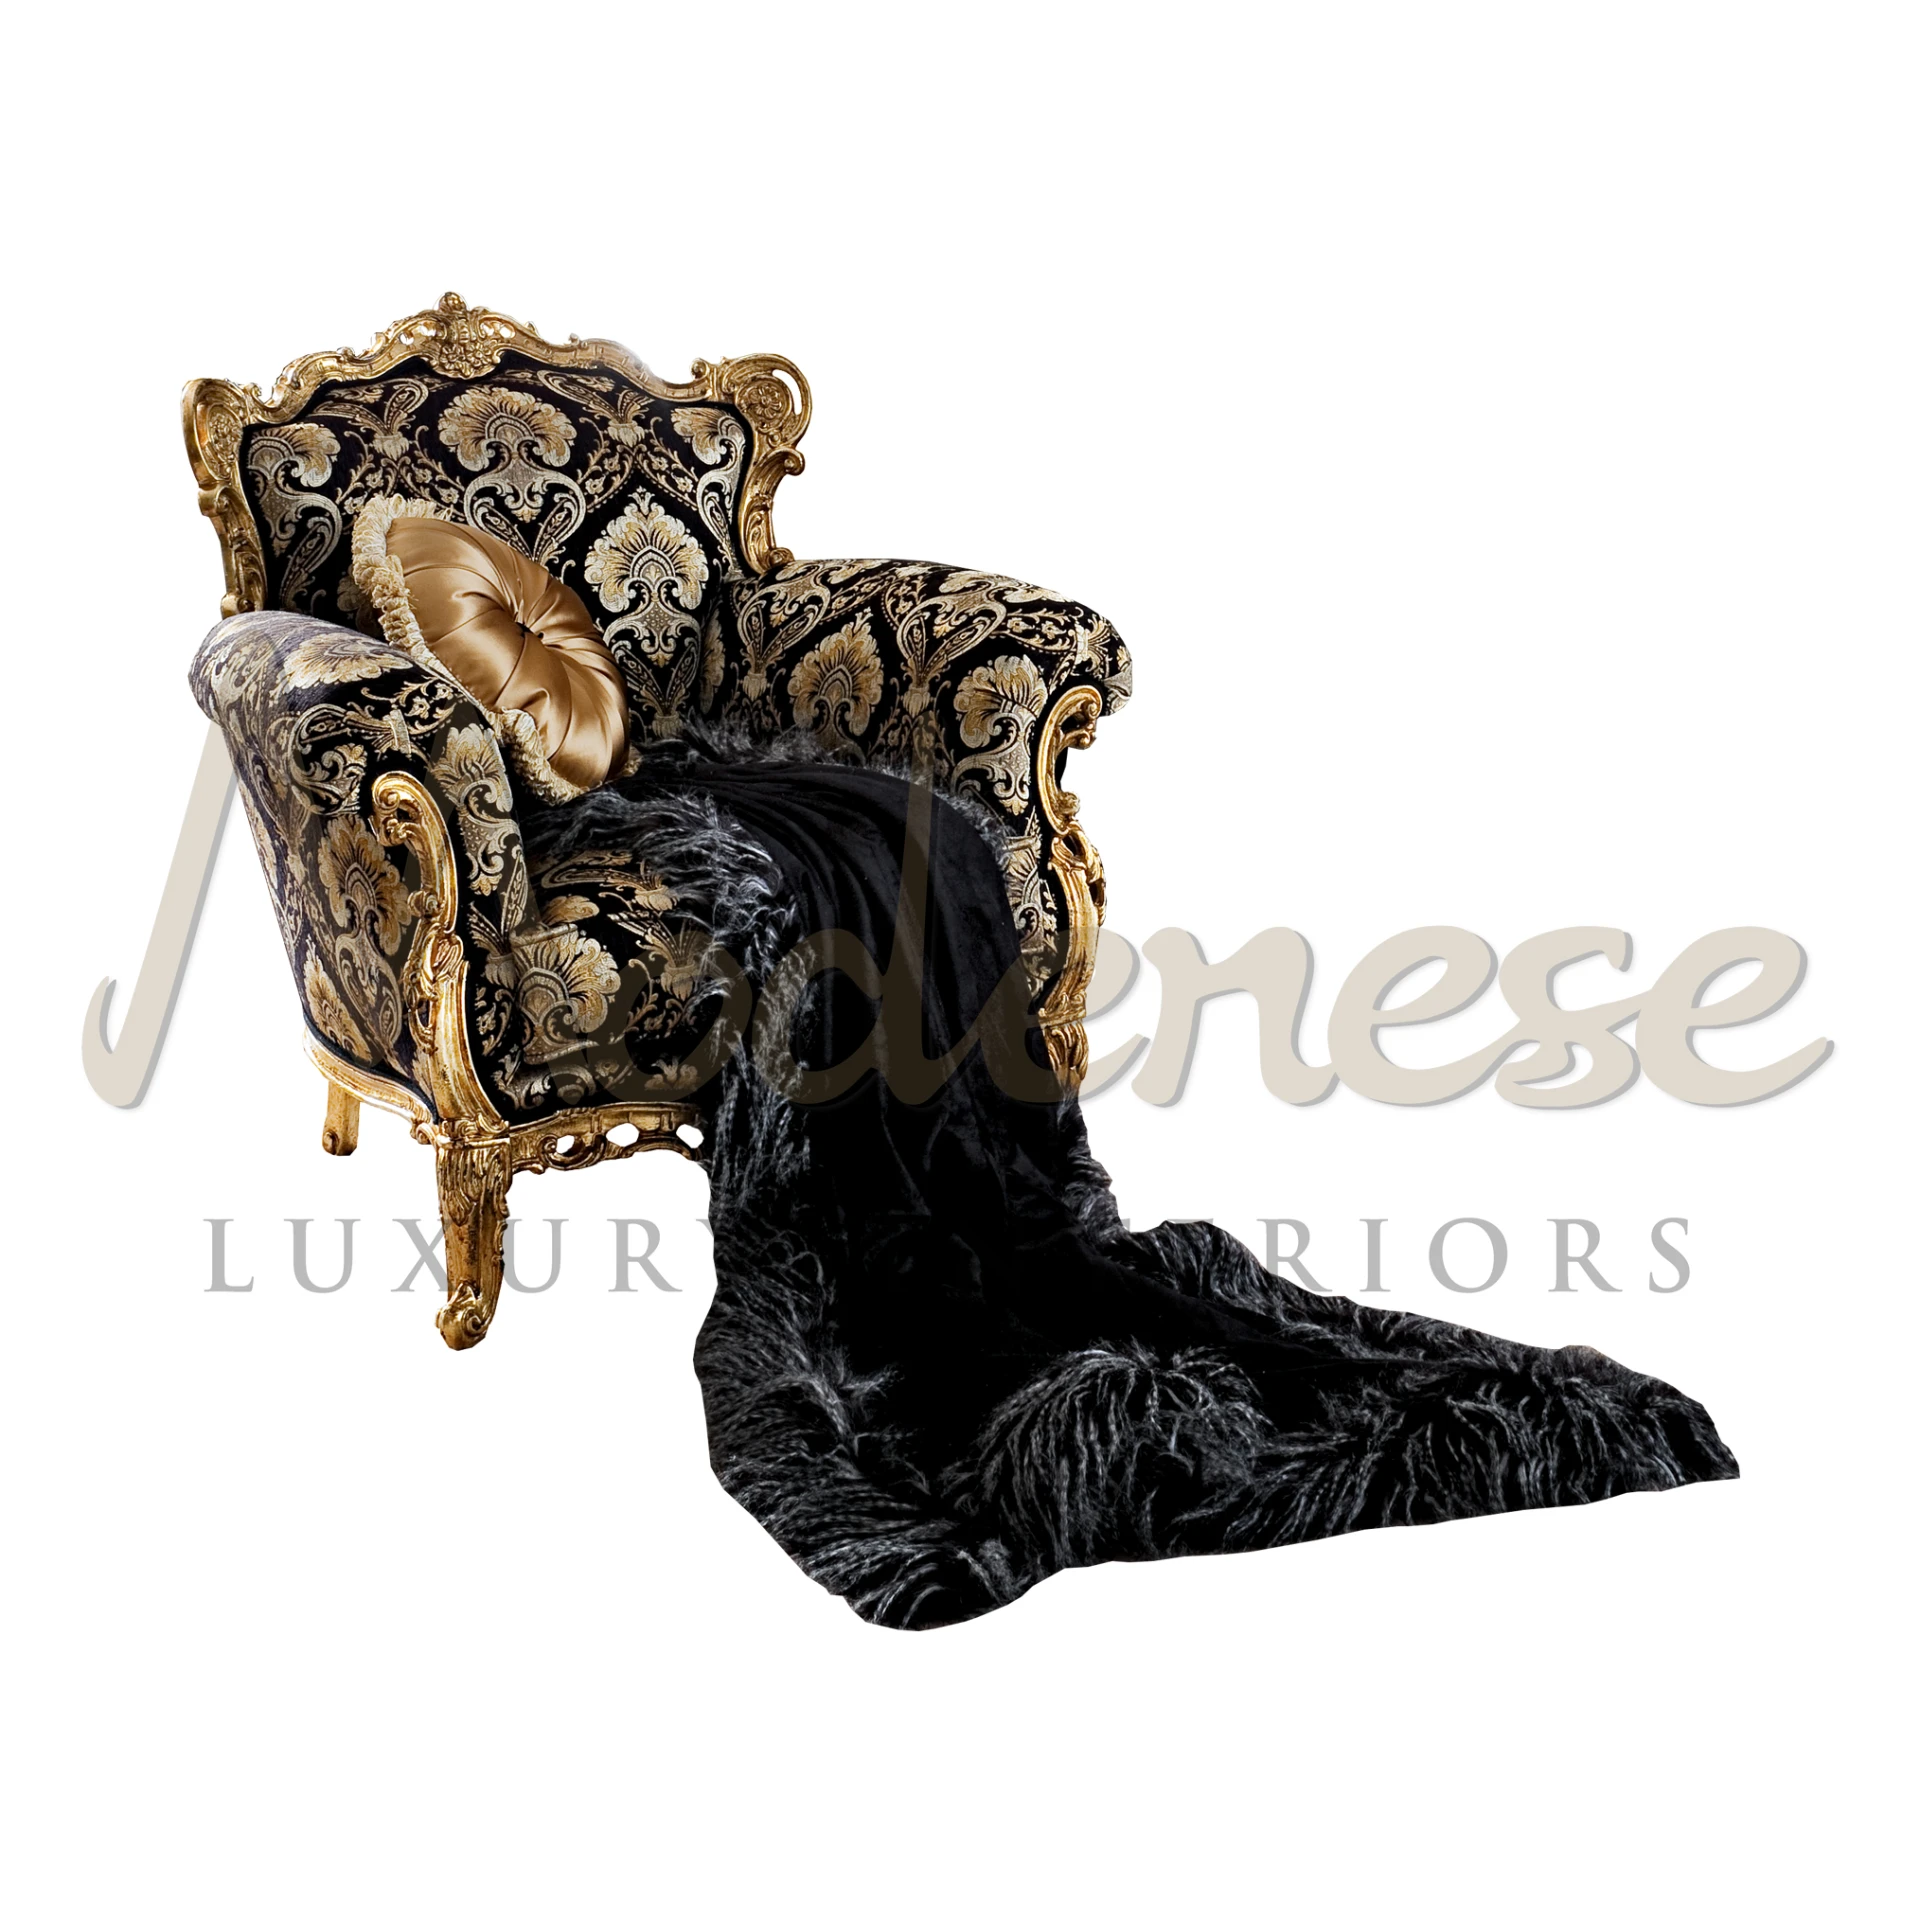 Ornate Carved Baroque Armchair: Timeless Beauty and Unrivaled Craftsmanship